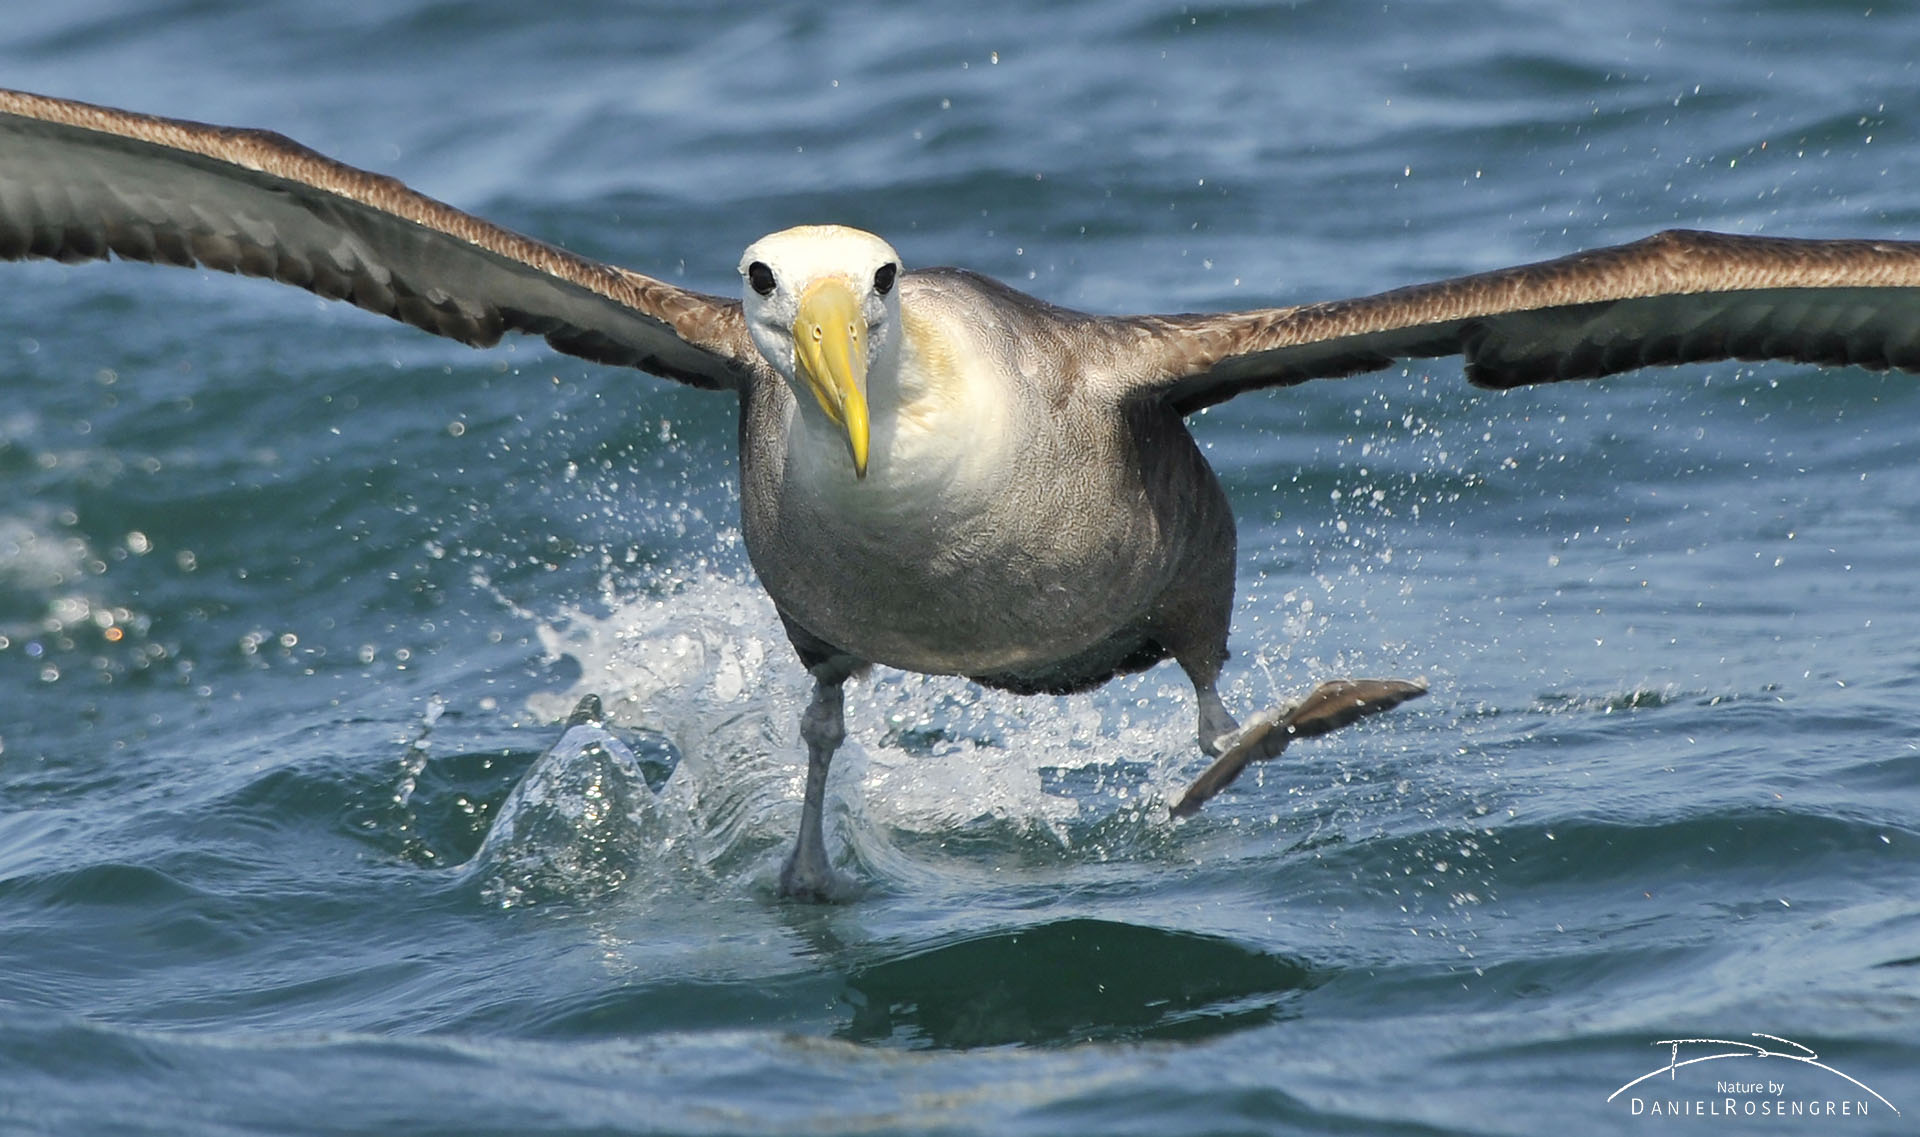 The critically endangered Waved albatross water skiing on the surface as it is landing. © Daniel Rosengren